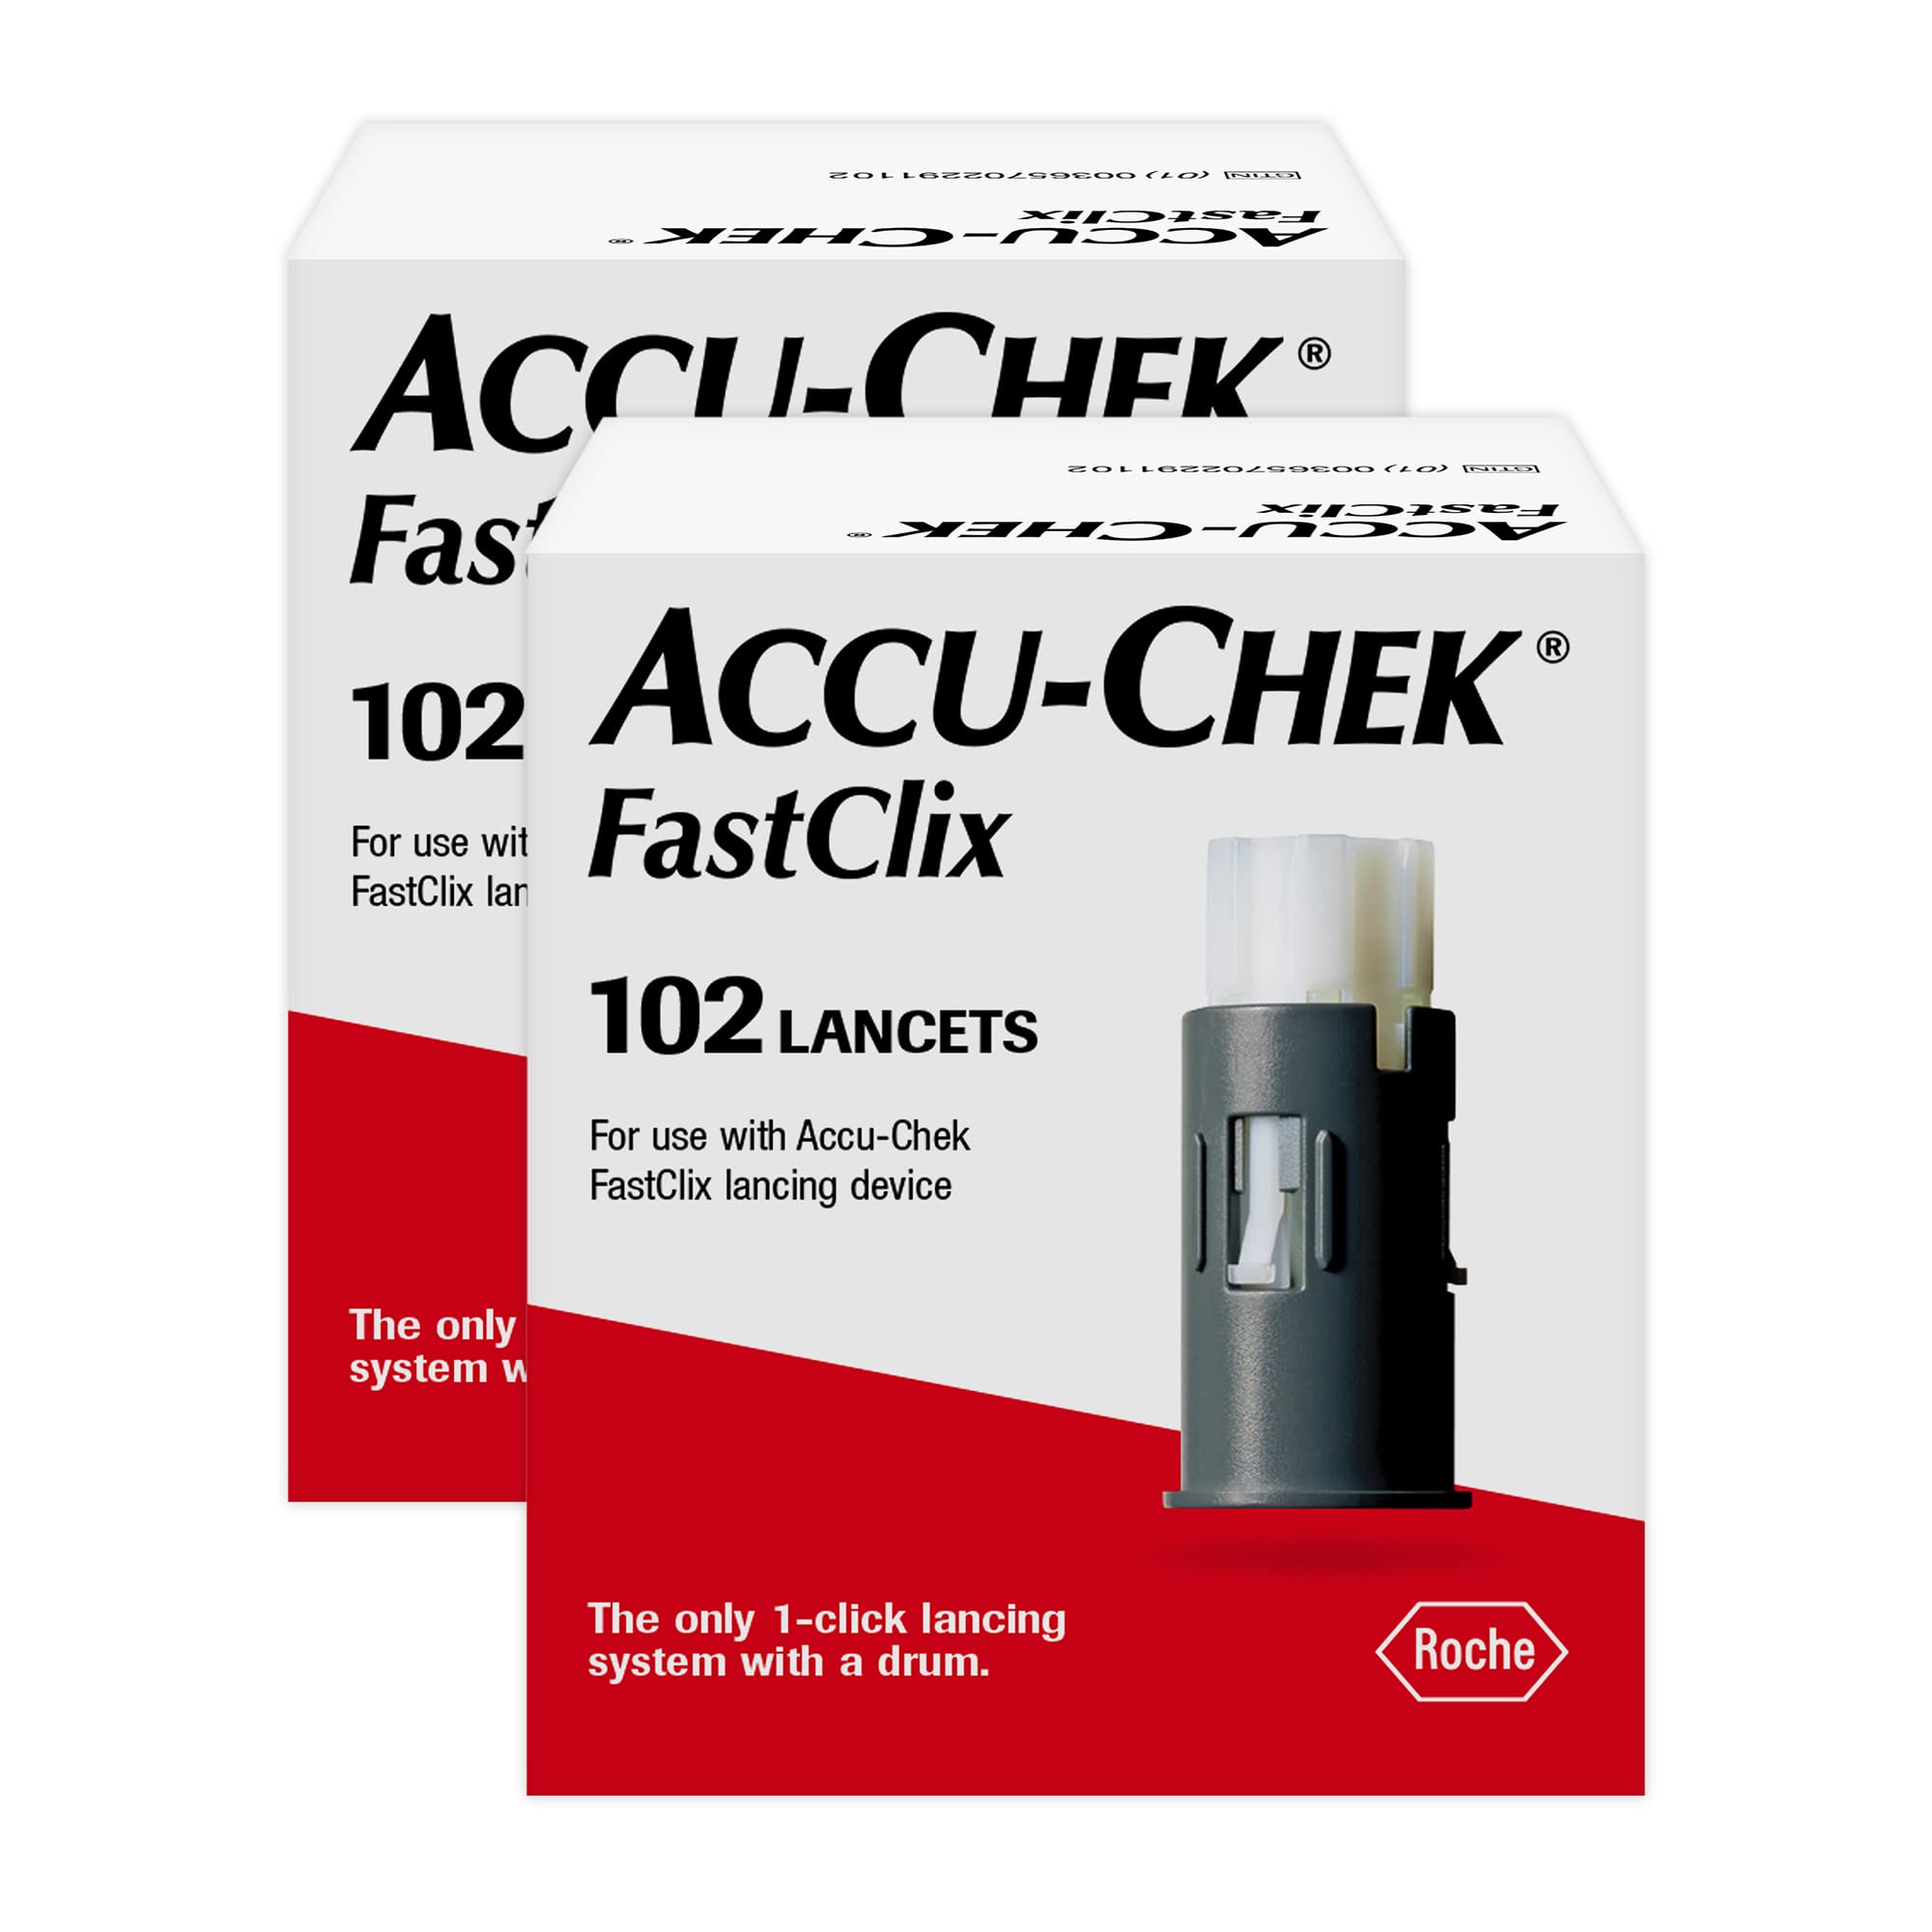 Accu-Chek FastClix Diabetes Lancets for Diabetic Blood Glucose Testing (2 Packs of 102)(Packaging May Vary)